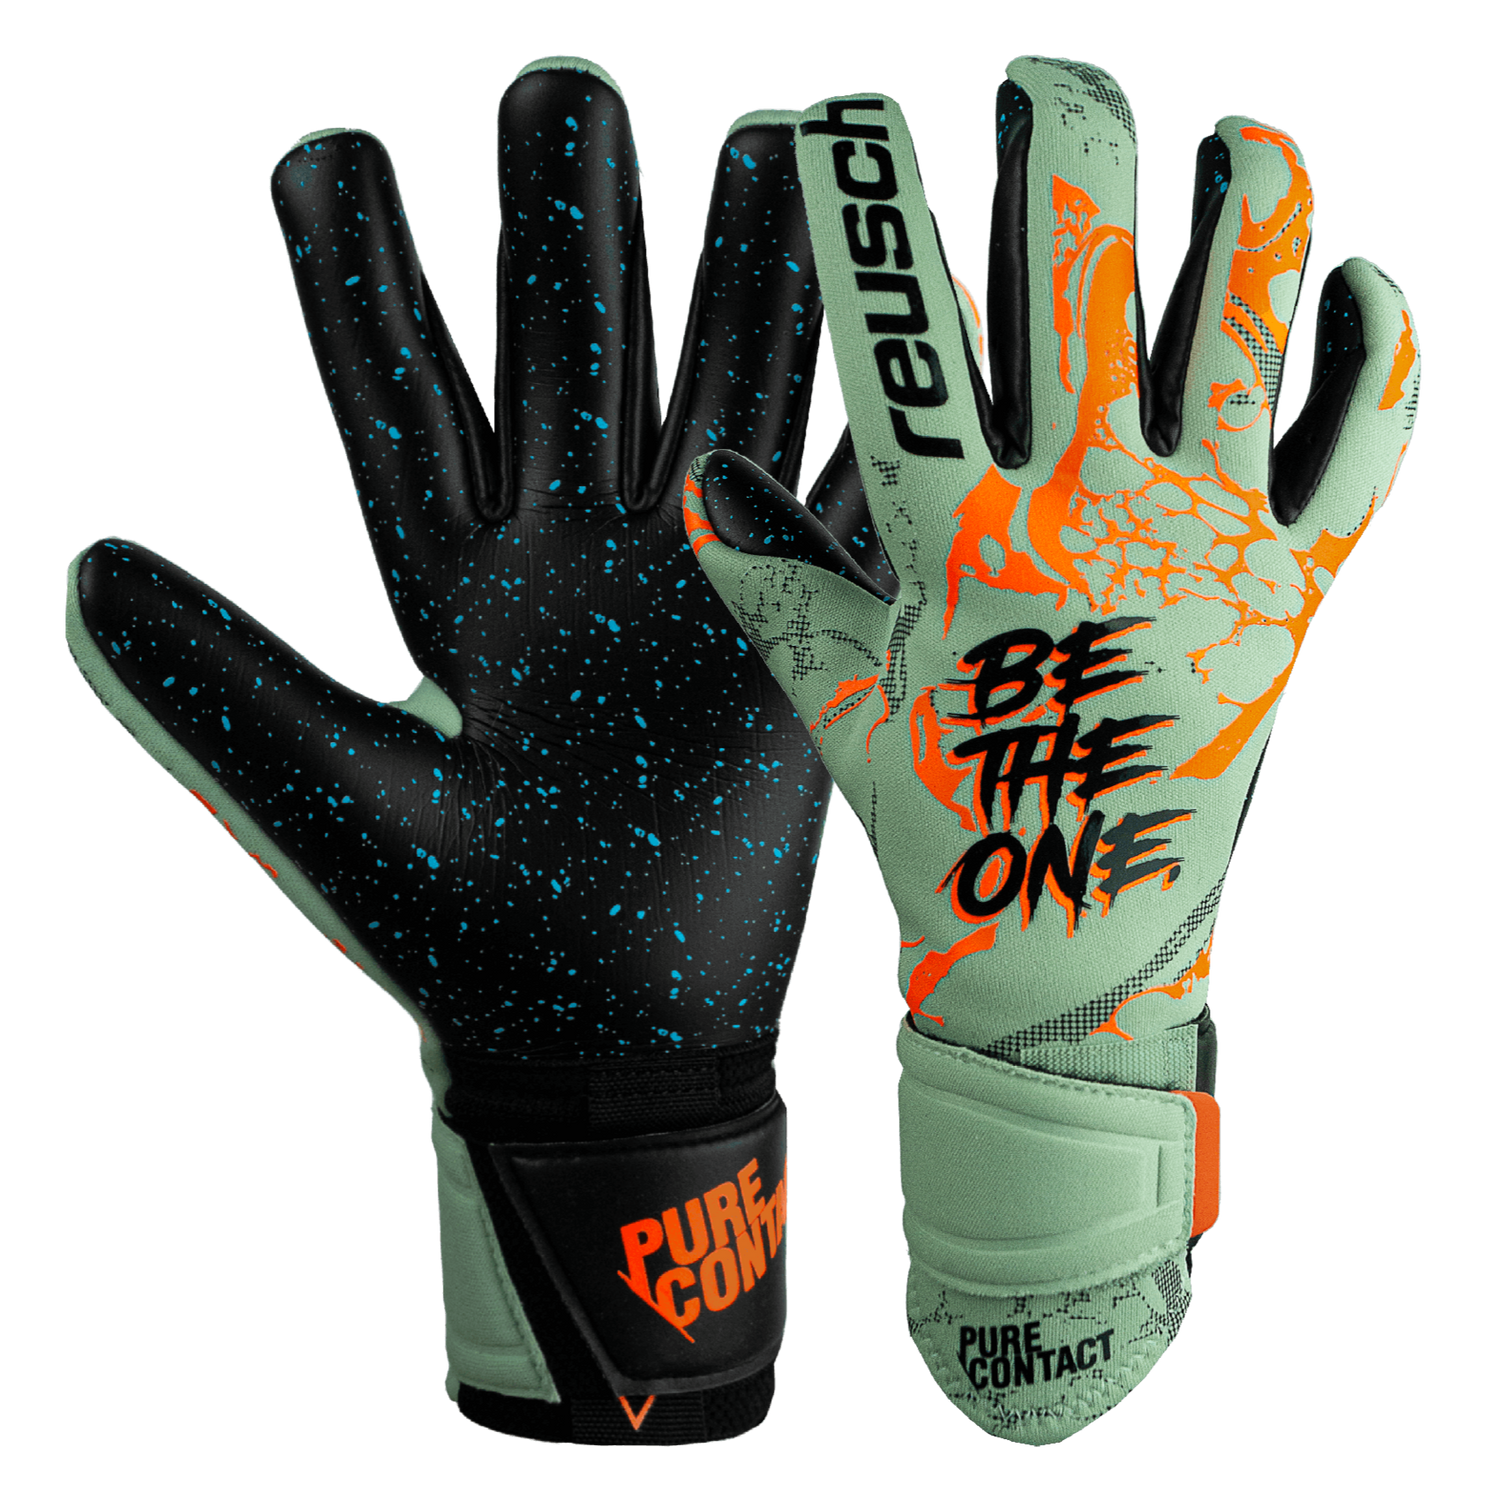 Reusch Pure Contact Fusion Goalkeeper Gloves - Shark Green-Shocking Orange-Black (Pair - Inner and Outer)